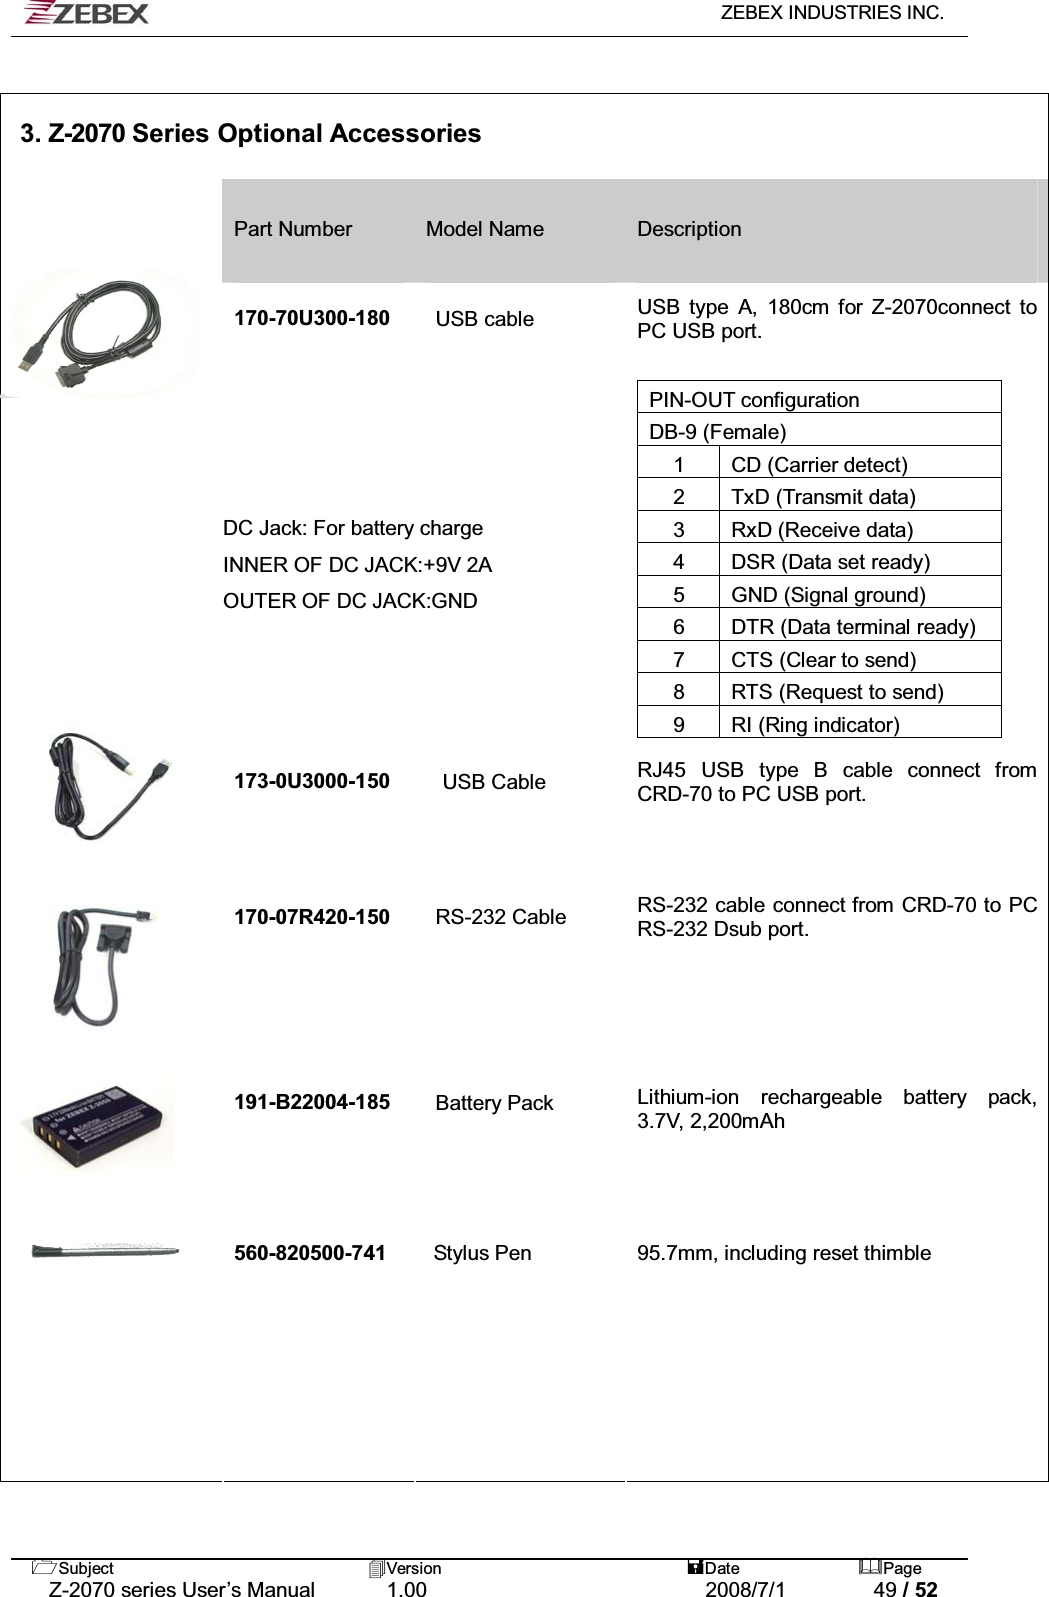   ZEBEX INDUSTRIES INC.   Subject Version  Date Page   Z-2070 series User’s Manual  1.00  2008/7/1  49 / 52   3. Z-2070 Series Optional Accessories  Part Number  Model Name  Description       170-70U300-180  USB cable  USB type A, 180cm for Z-2070connect to PC USB port.    DC Jack: For battery charge INNER OF DC JACK:+9V 2A OUTER OF DC JACK:GND  PIN-OUT configuration DB-9 (Female) 1  CD (Carrier detect) 2  TxD (Transmit data) 3 RxD (Receive data) 4  DSR (Data set ready) 5  GND (Signal ground) 6  DTR (Data terminal ready) 7 CTS (Clear to send) 8  RTS (Request to send) 9  RI (Ring indicator)  173-0U3000-150  USB Cable  RJ45 USB type B cable connect from CRD-70 to PC USB port.       170-07R420-150  RS-232 Cable  RS-232 cable connect from CRD-70 to PC RS-232 Dsub port.          191-B22004-185  Battery Pack  Lithium-ion rechargeable battery pack, 3.7V, 2,200mAh       560-820500-741  Stylus Pen  95.7mm, including reset thimble                                     